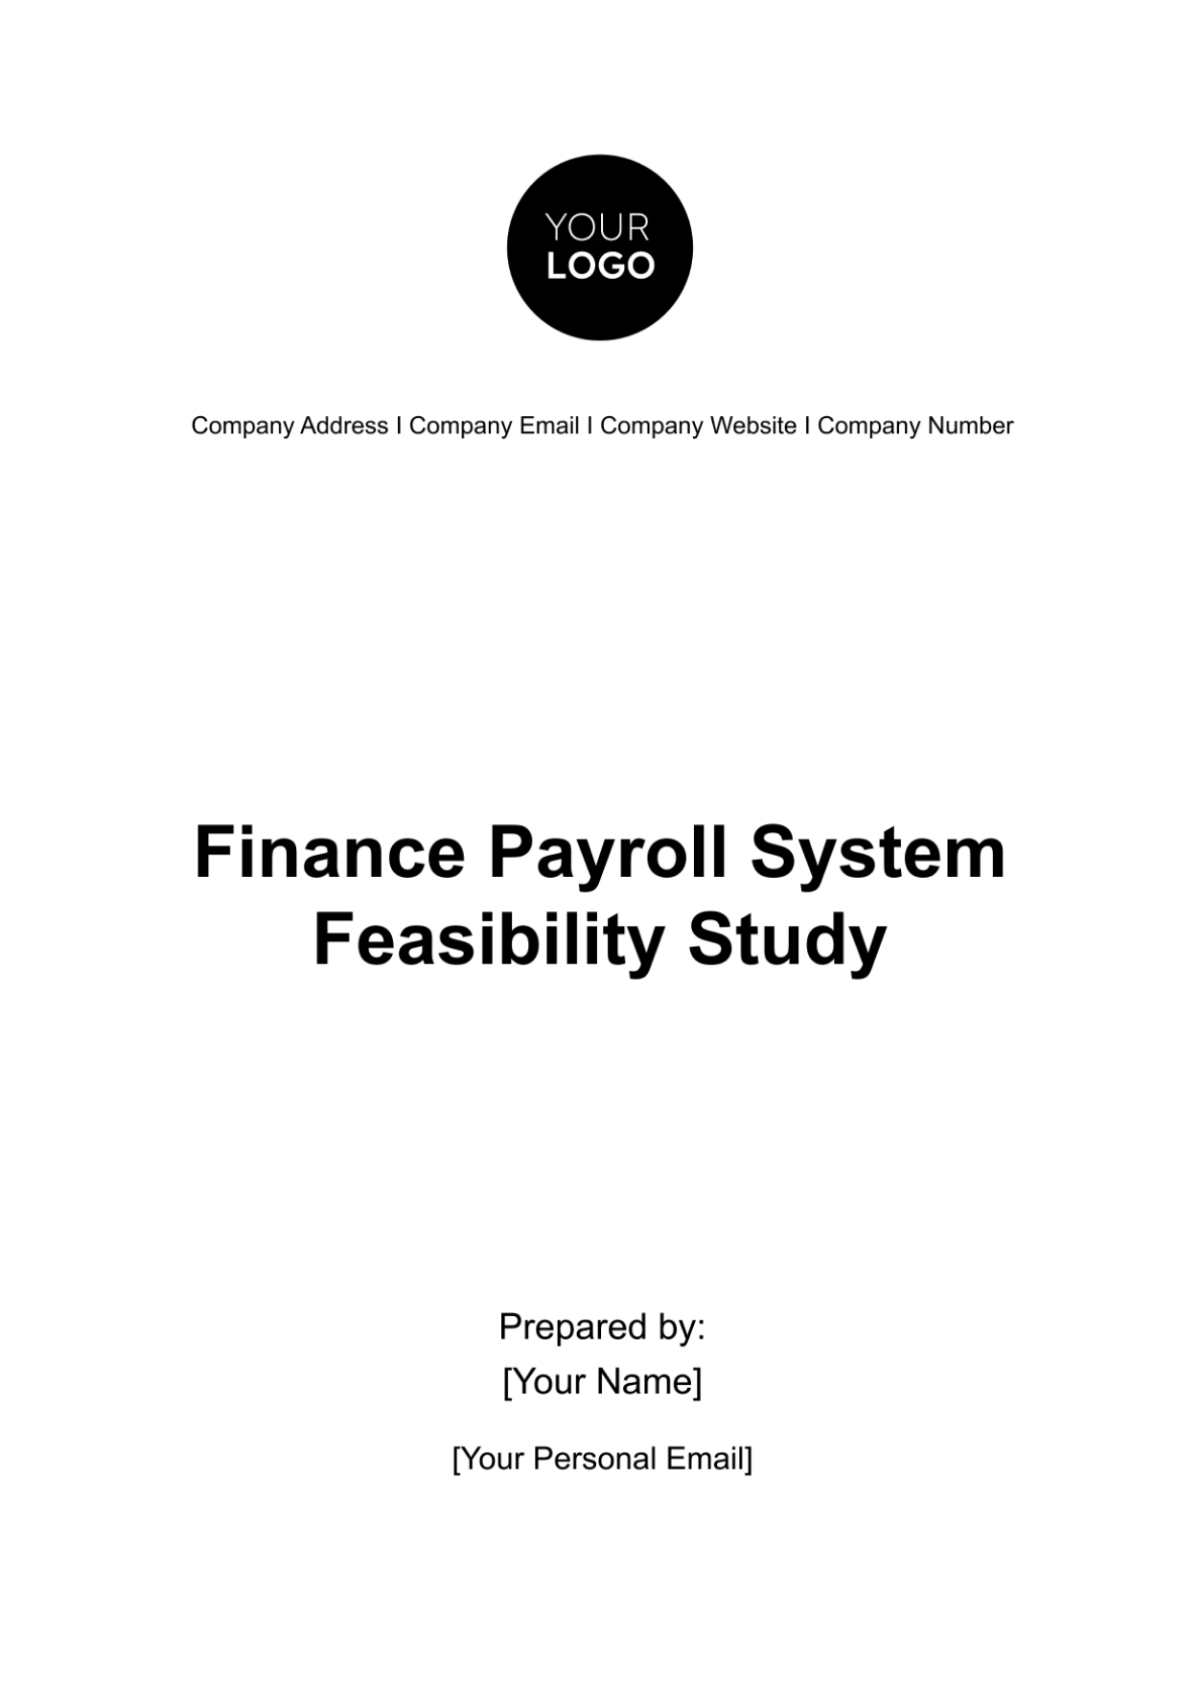 Finance Payroll System Feasibility Study Template